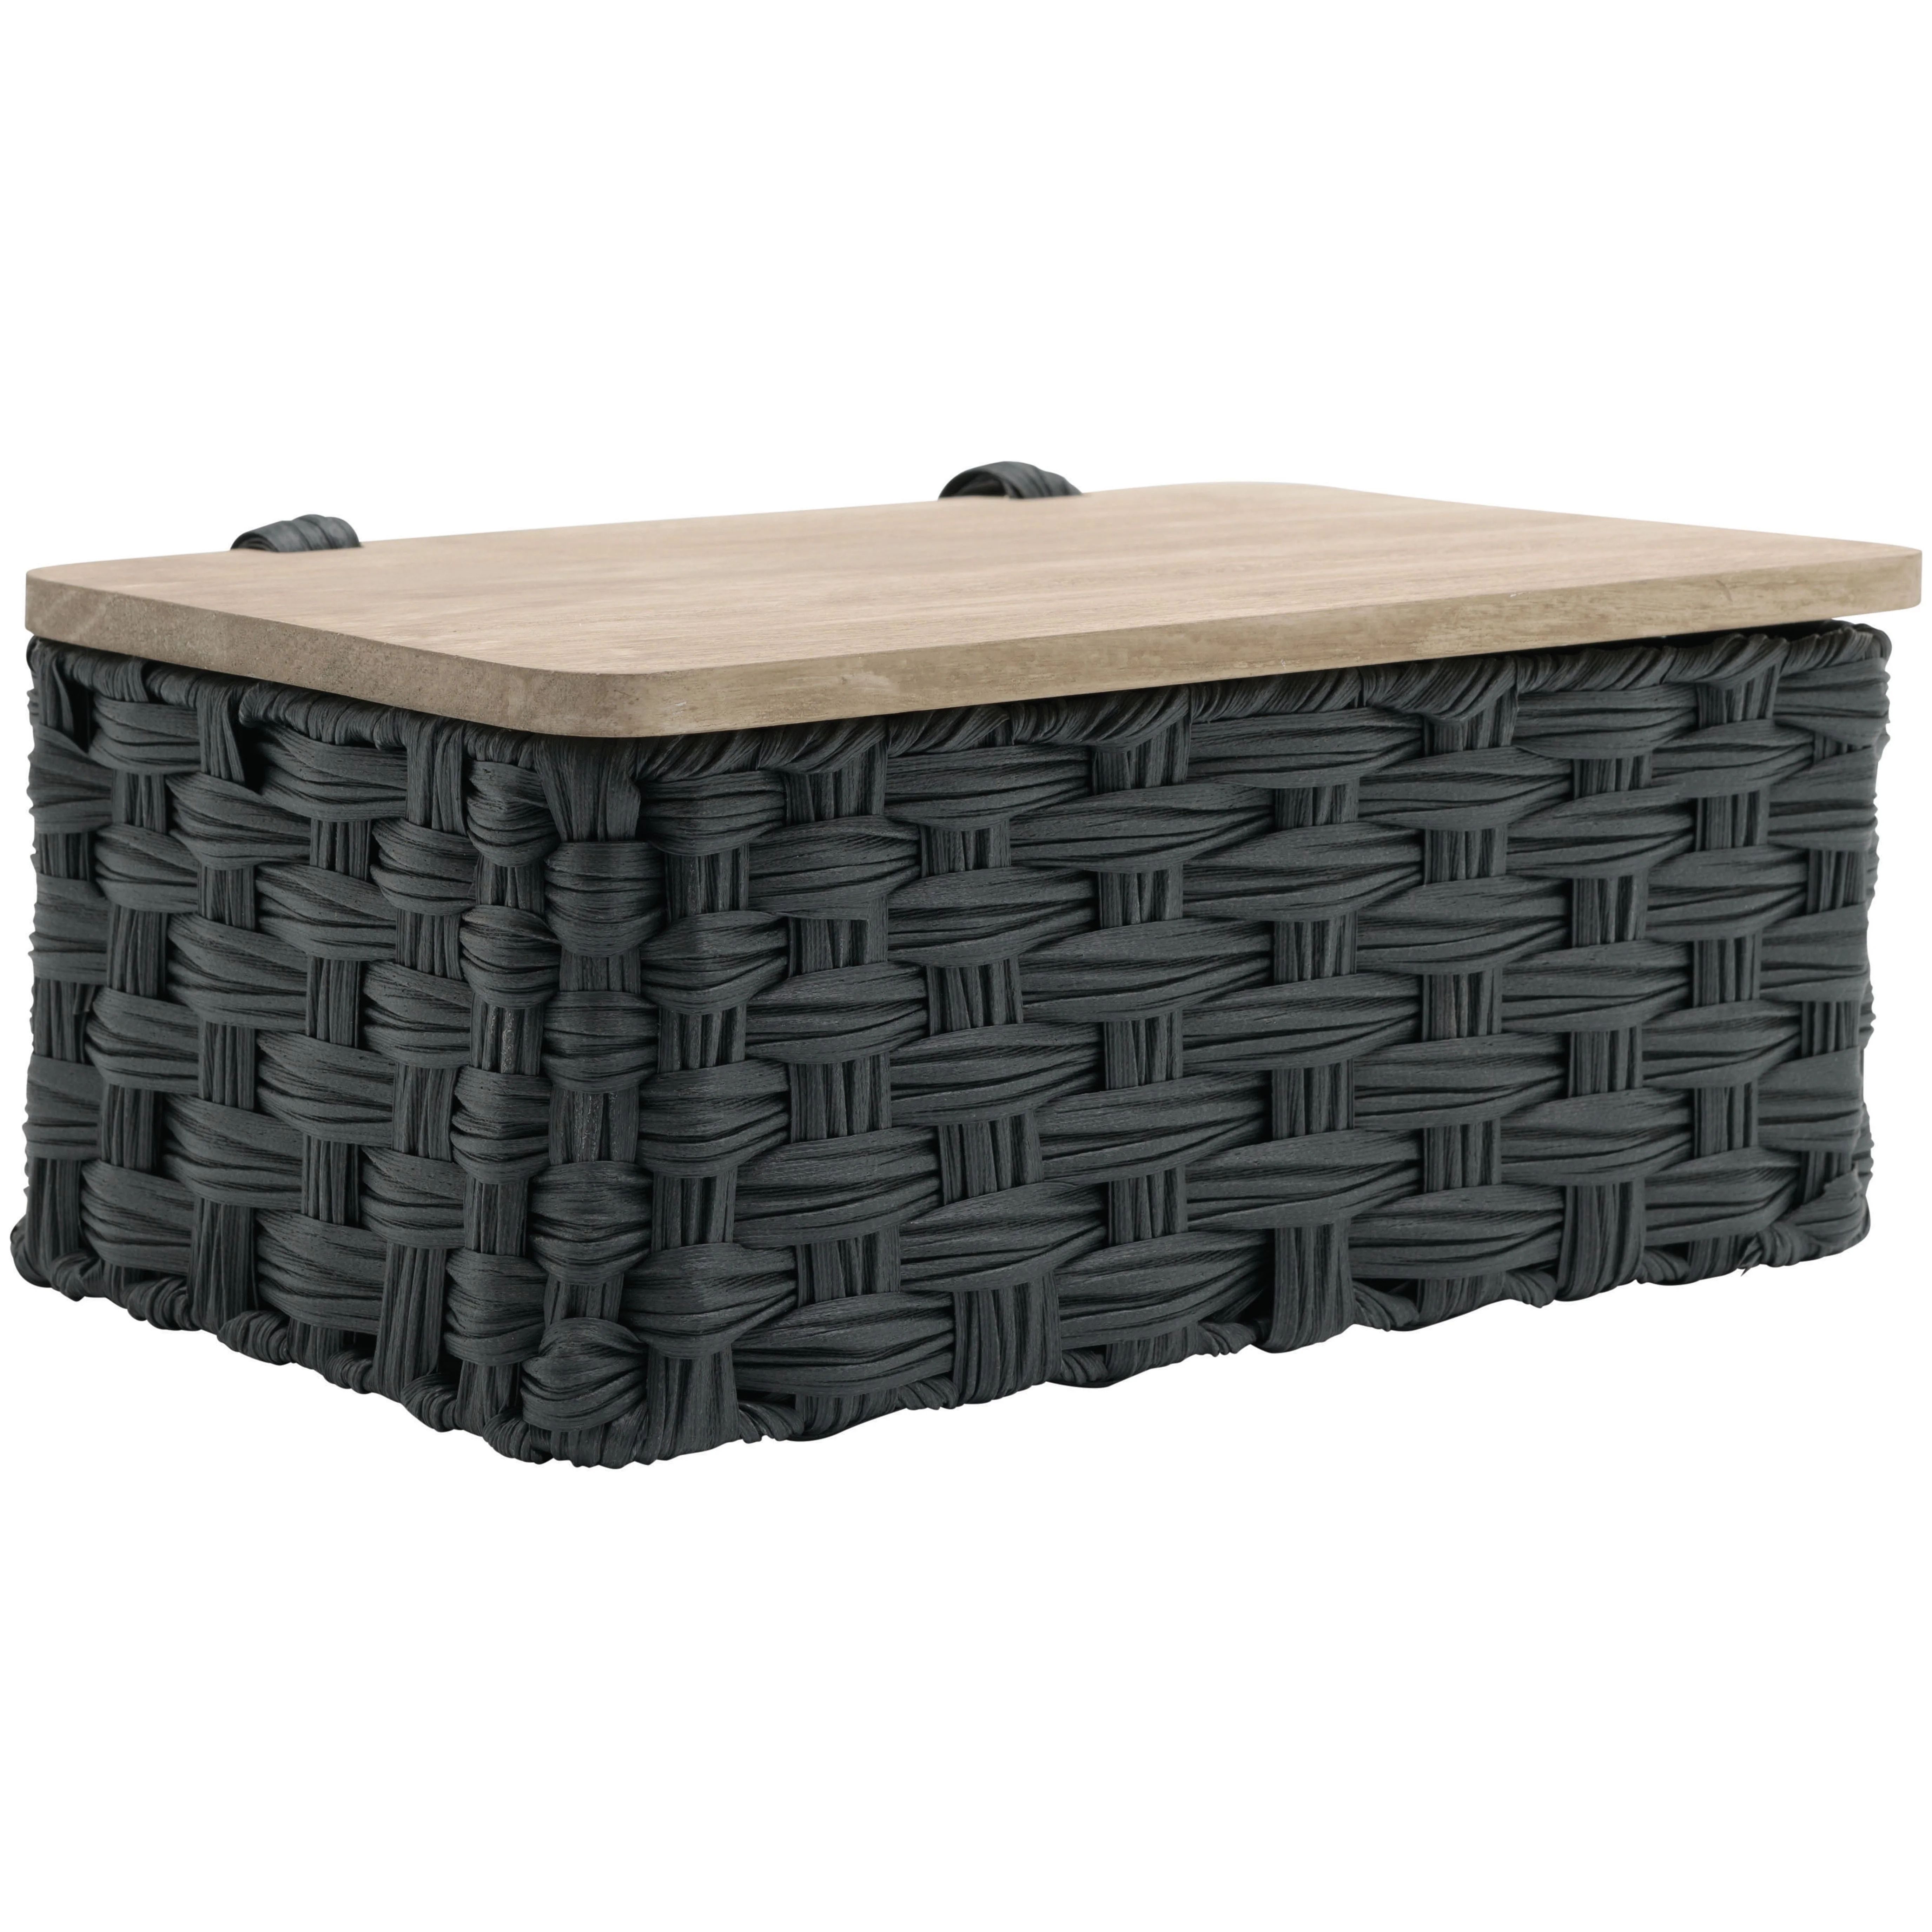 Better Homes & Gardens Black Resin Basket with Woven Design and Natural Wood Lid | Walmart (US)